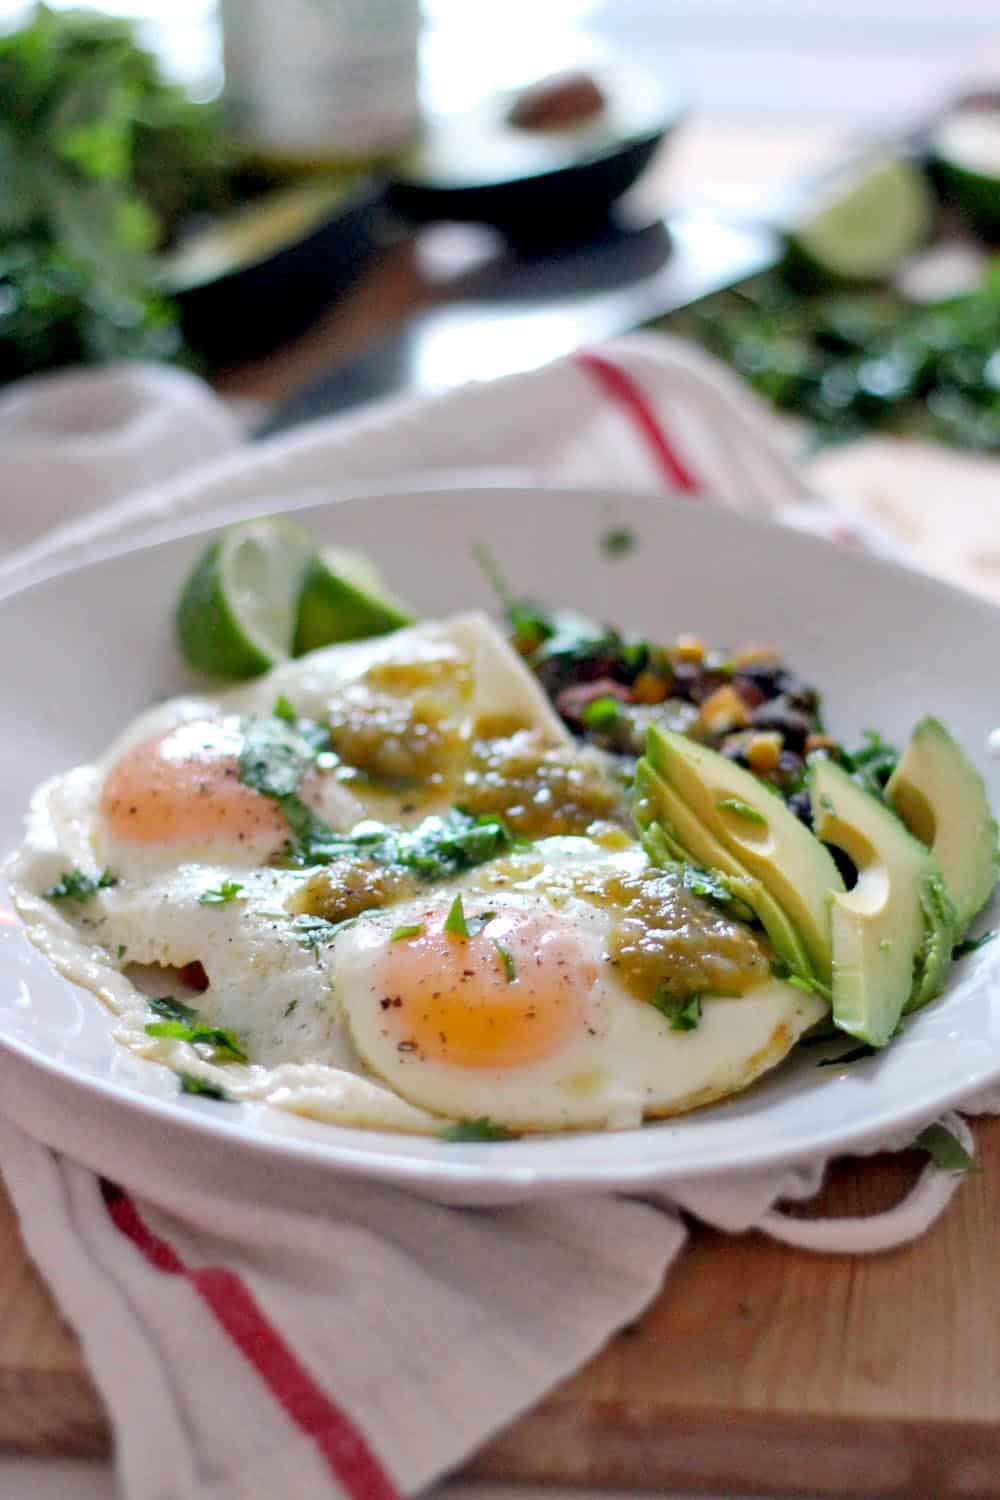 Two fried eggs on a plate with avocado slices, black beans, and chopped herb garnish on a white plate.